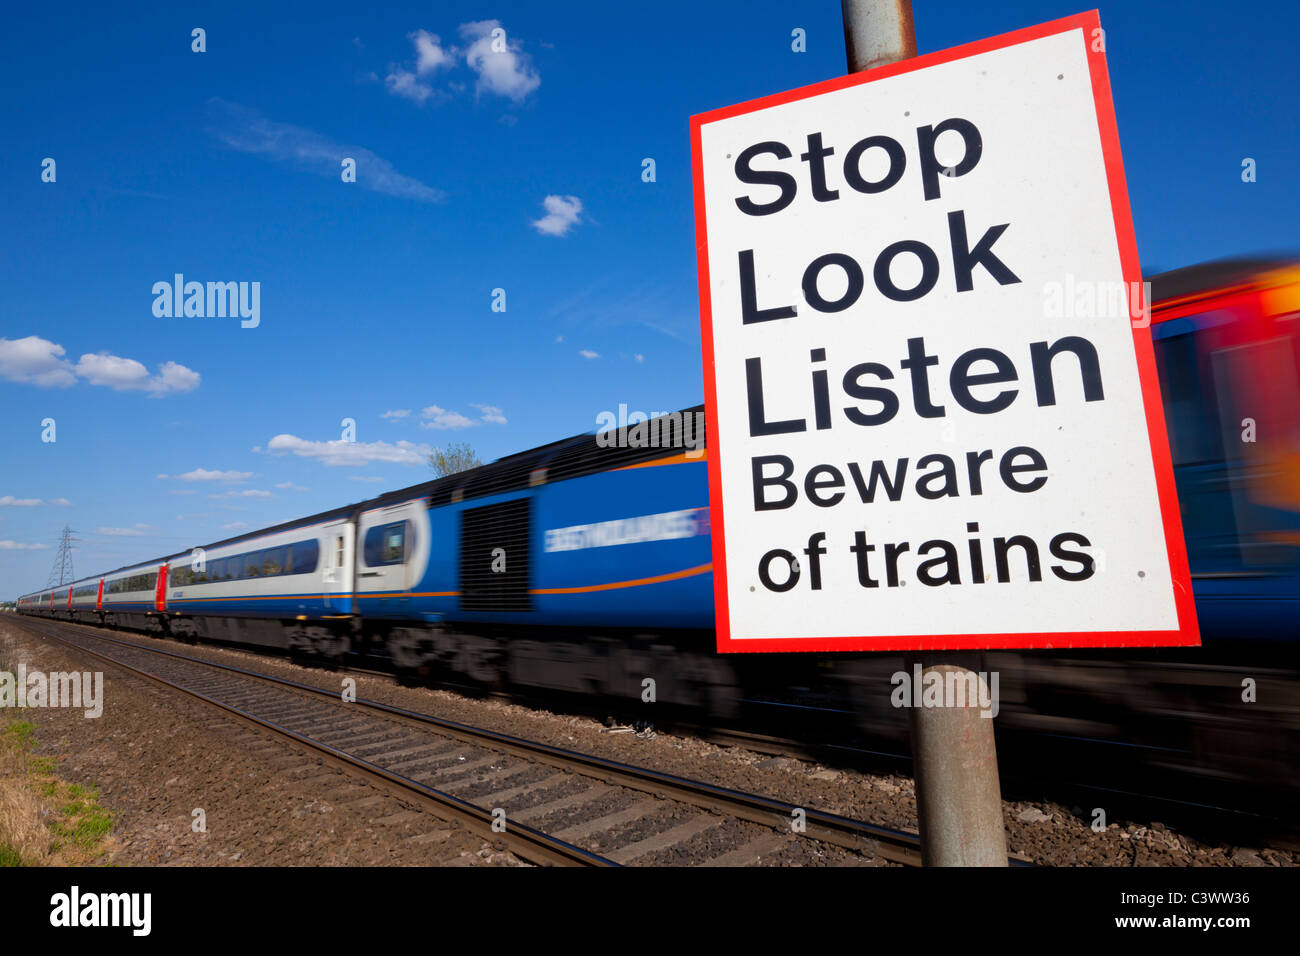 Stop look listen beware of trains sign by a Speeding train passing a railway crossing warning sign  England GB UK Europe Stock Photo